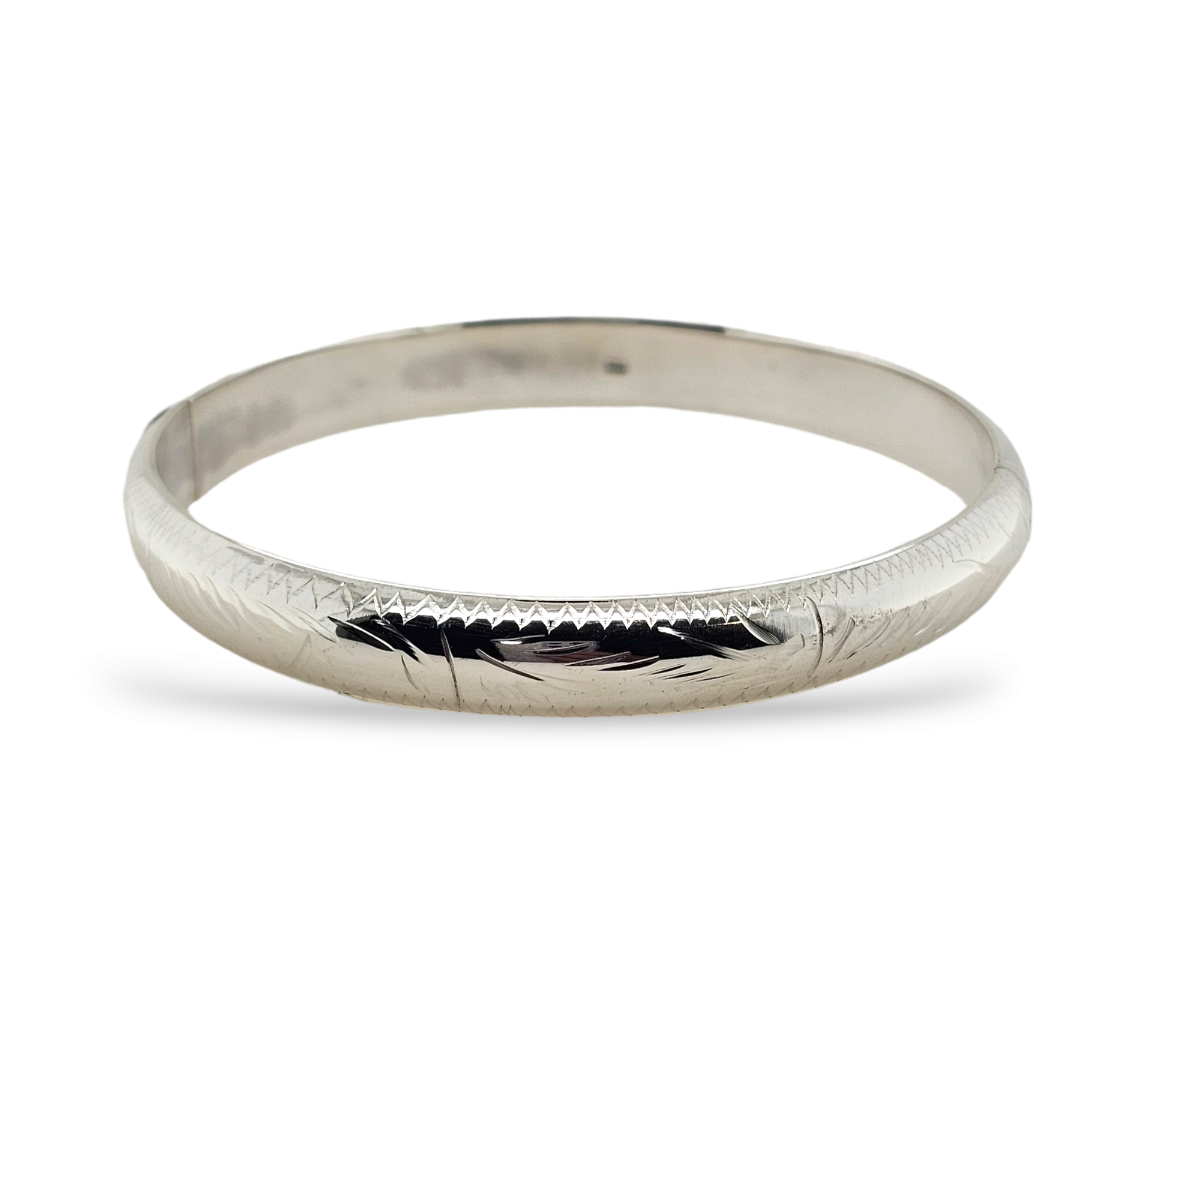 BANGLE S/S 10 X 60mm ENGRAVED